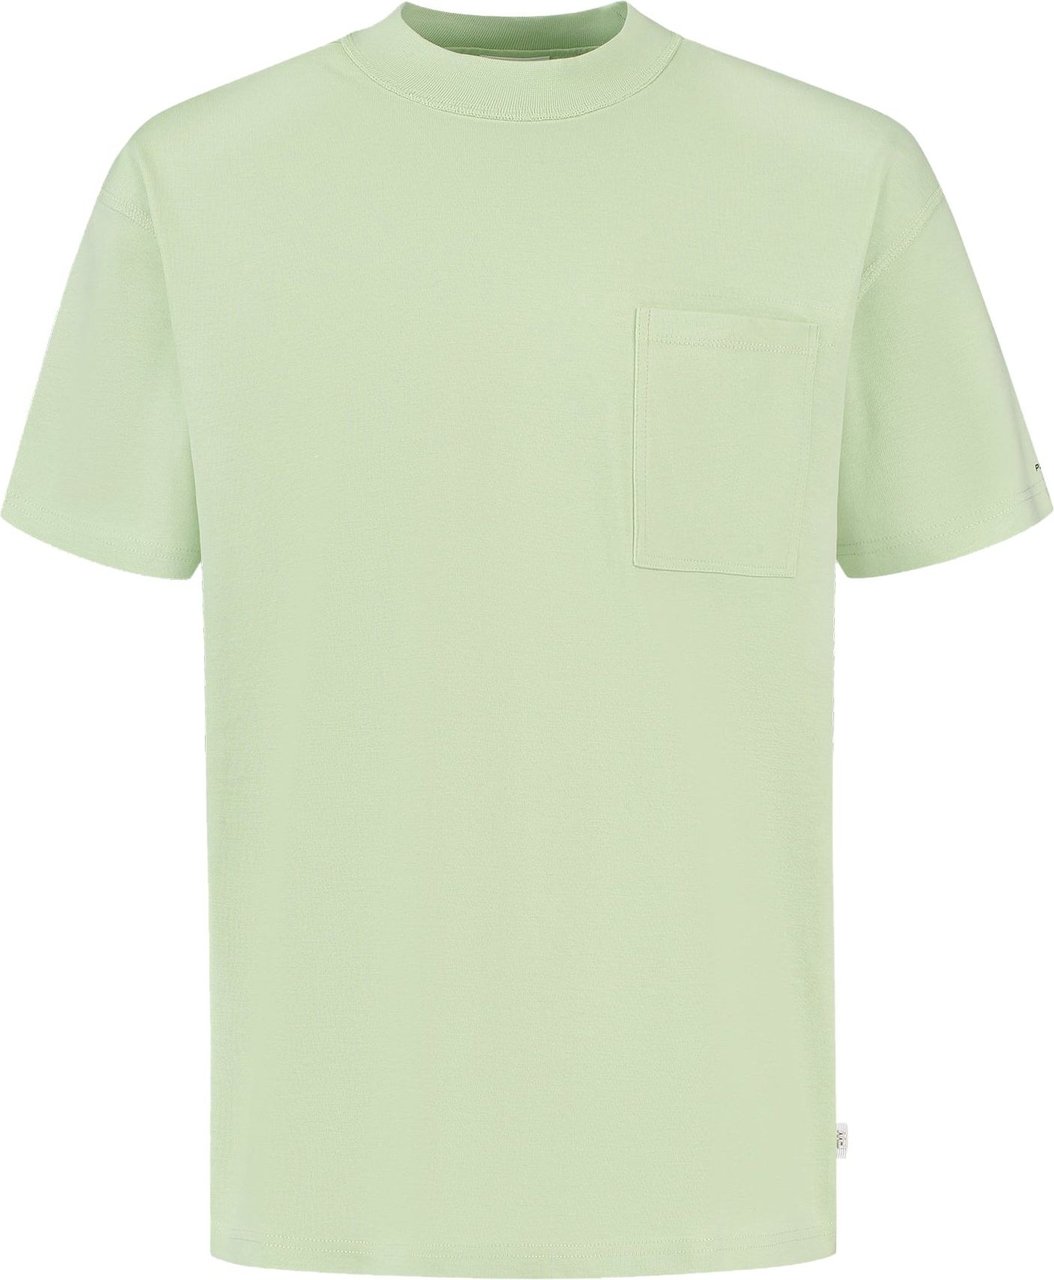 Purewhite Purewhite Ultimate Relaxed Fit T-shirt Licht Groen Groen